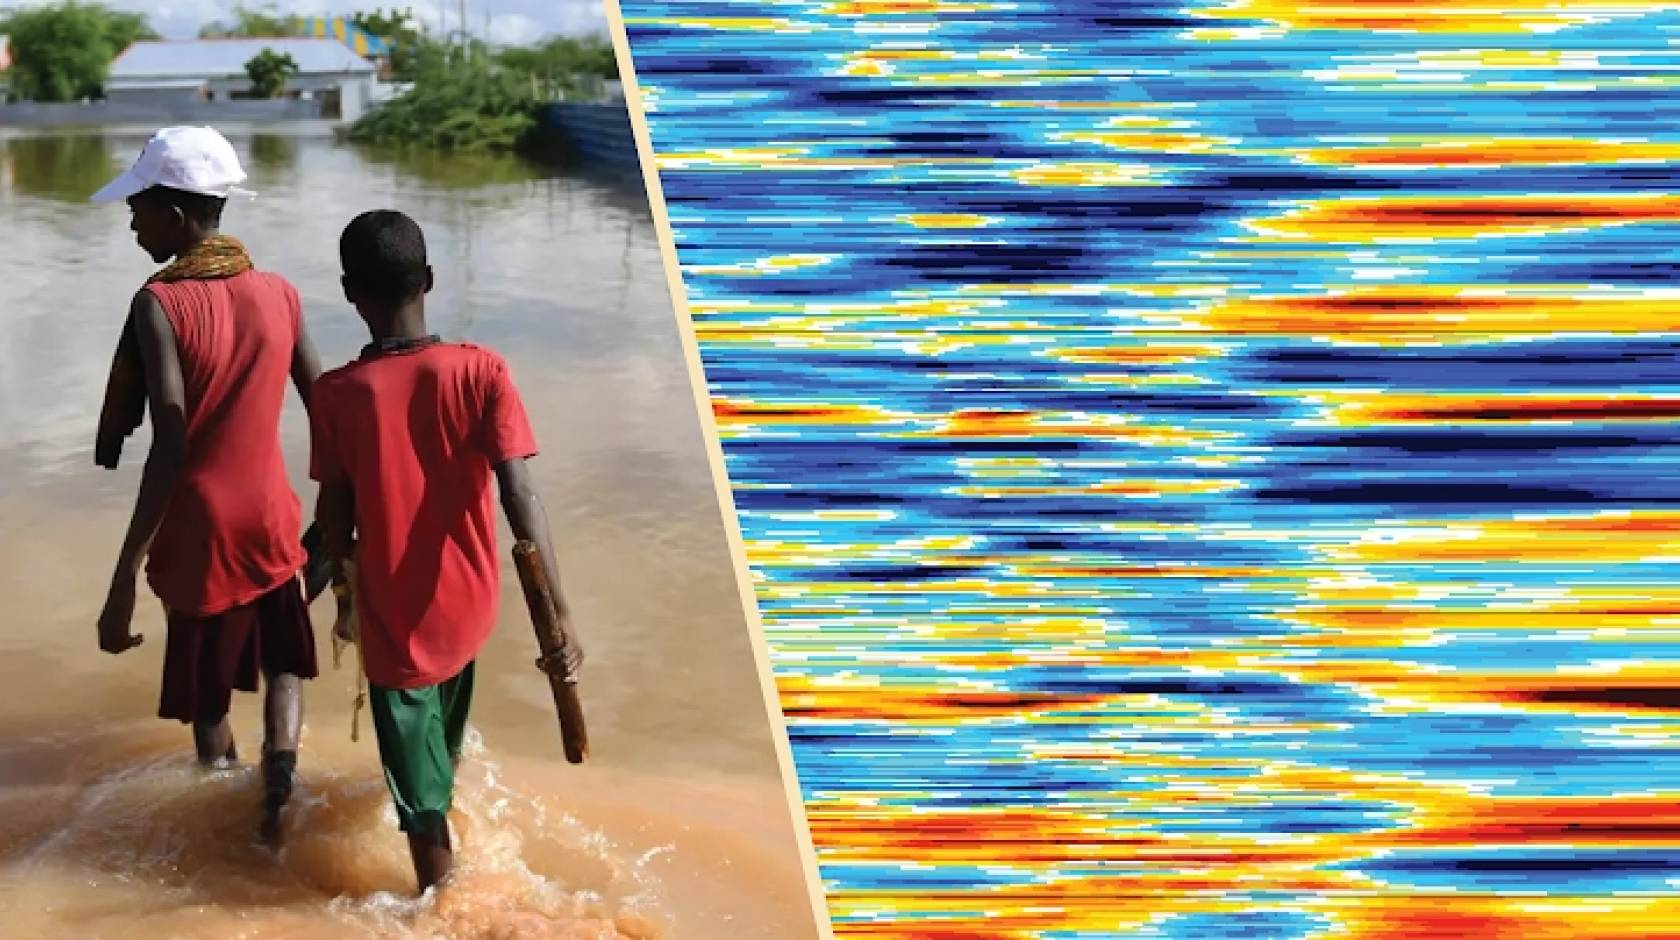 Two East African youths walk through a flooded street, with a weather heatmap juxtaposed on the right side of the image